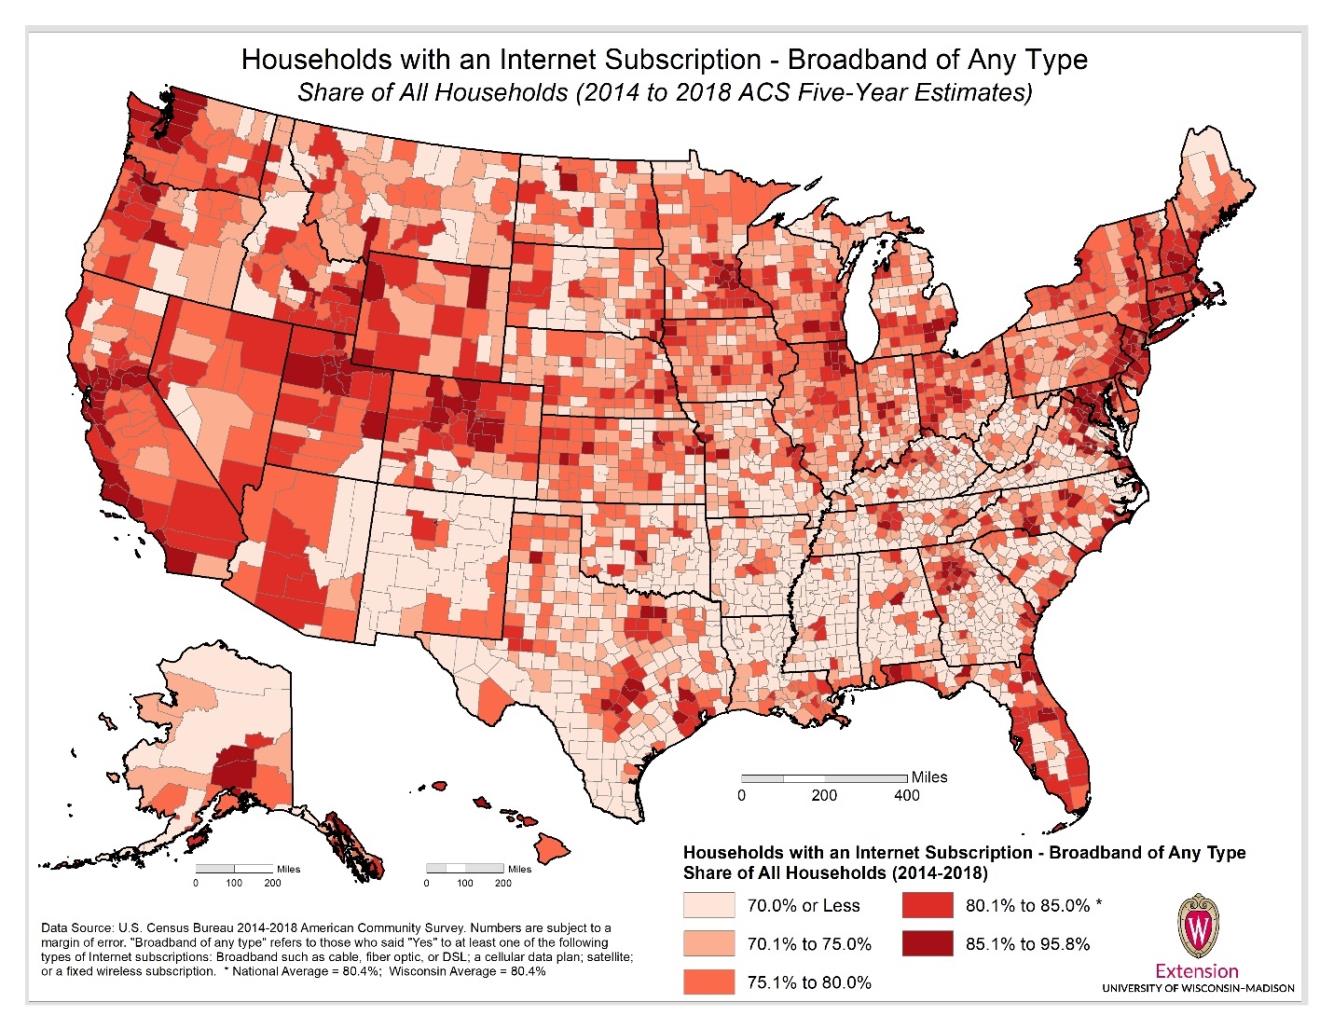 Households with an Internet Subscription - Broadband of Any Type. Share of All Households (2014 to 2018 ACS Five-Year Estimates)